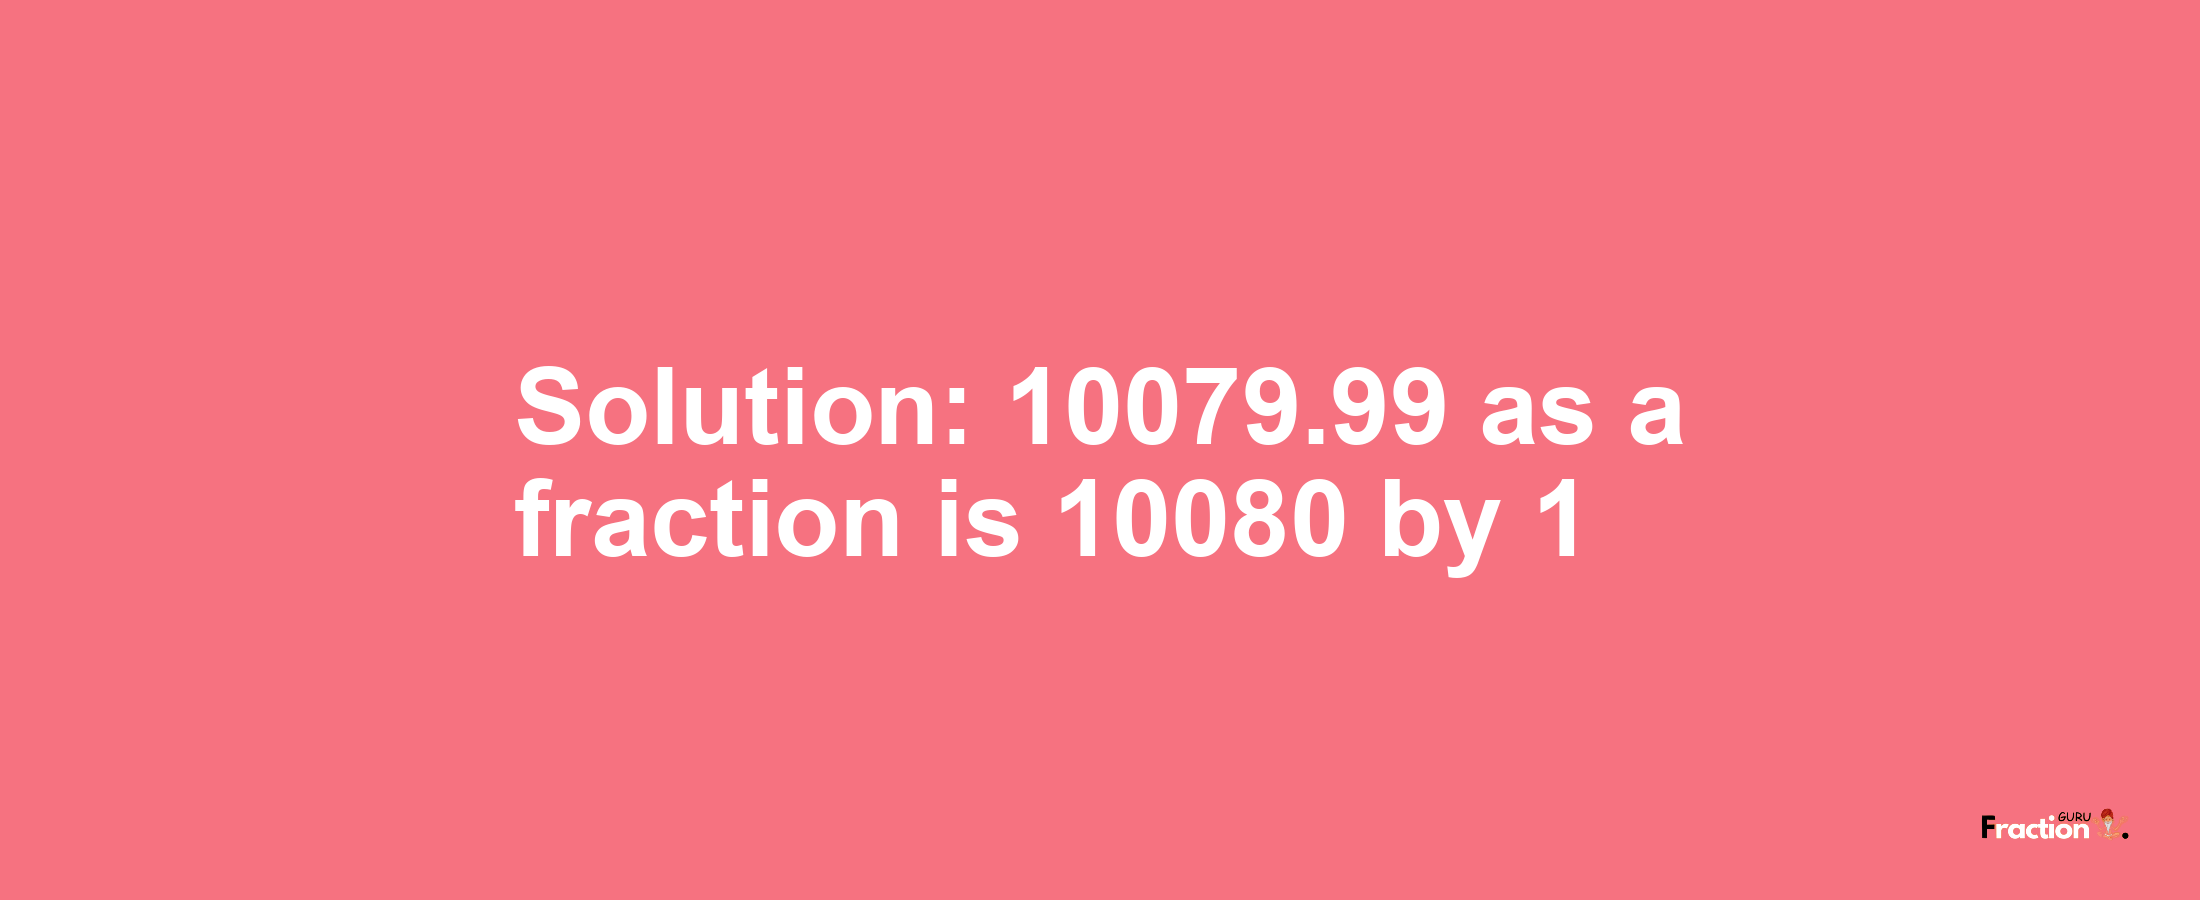 Solution:10079.99 as a fraction is 10080/1